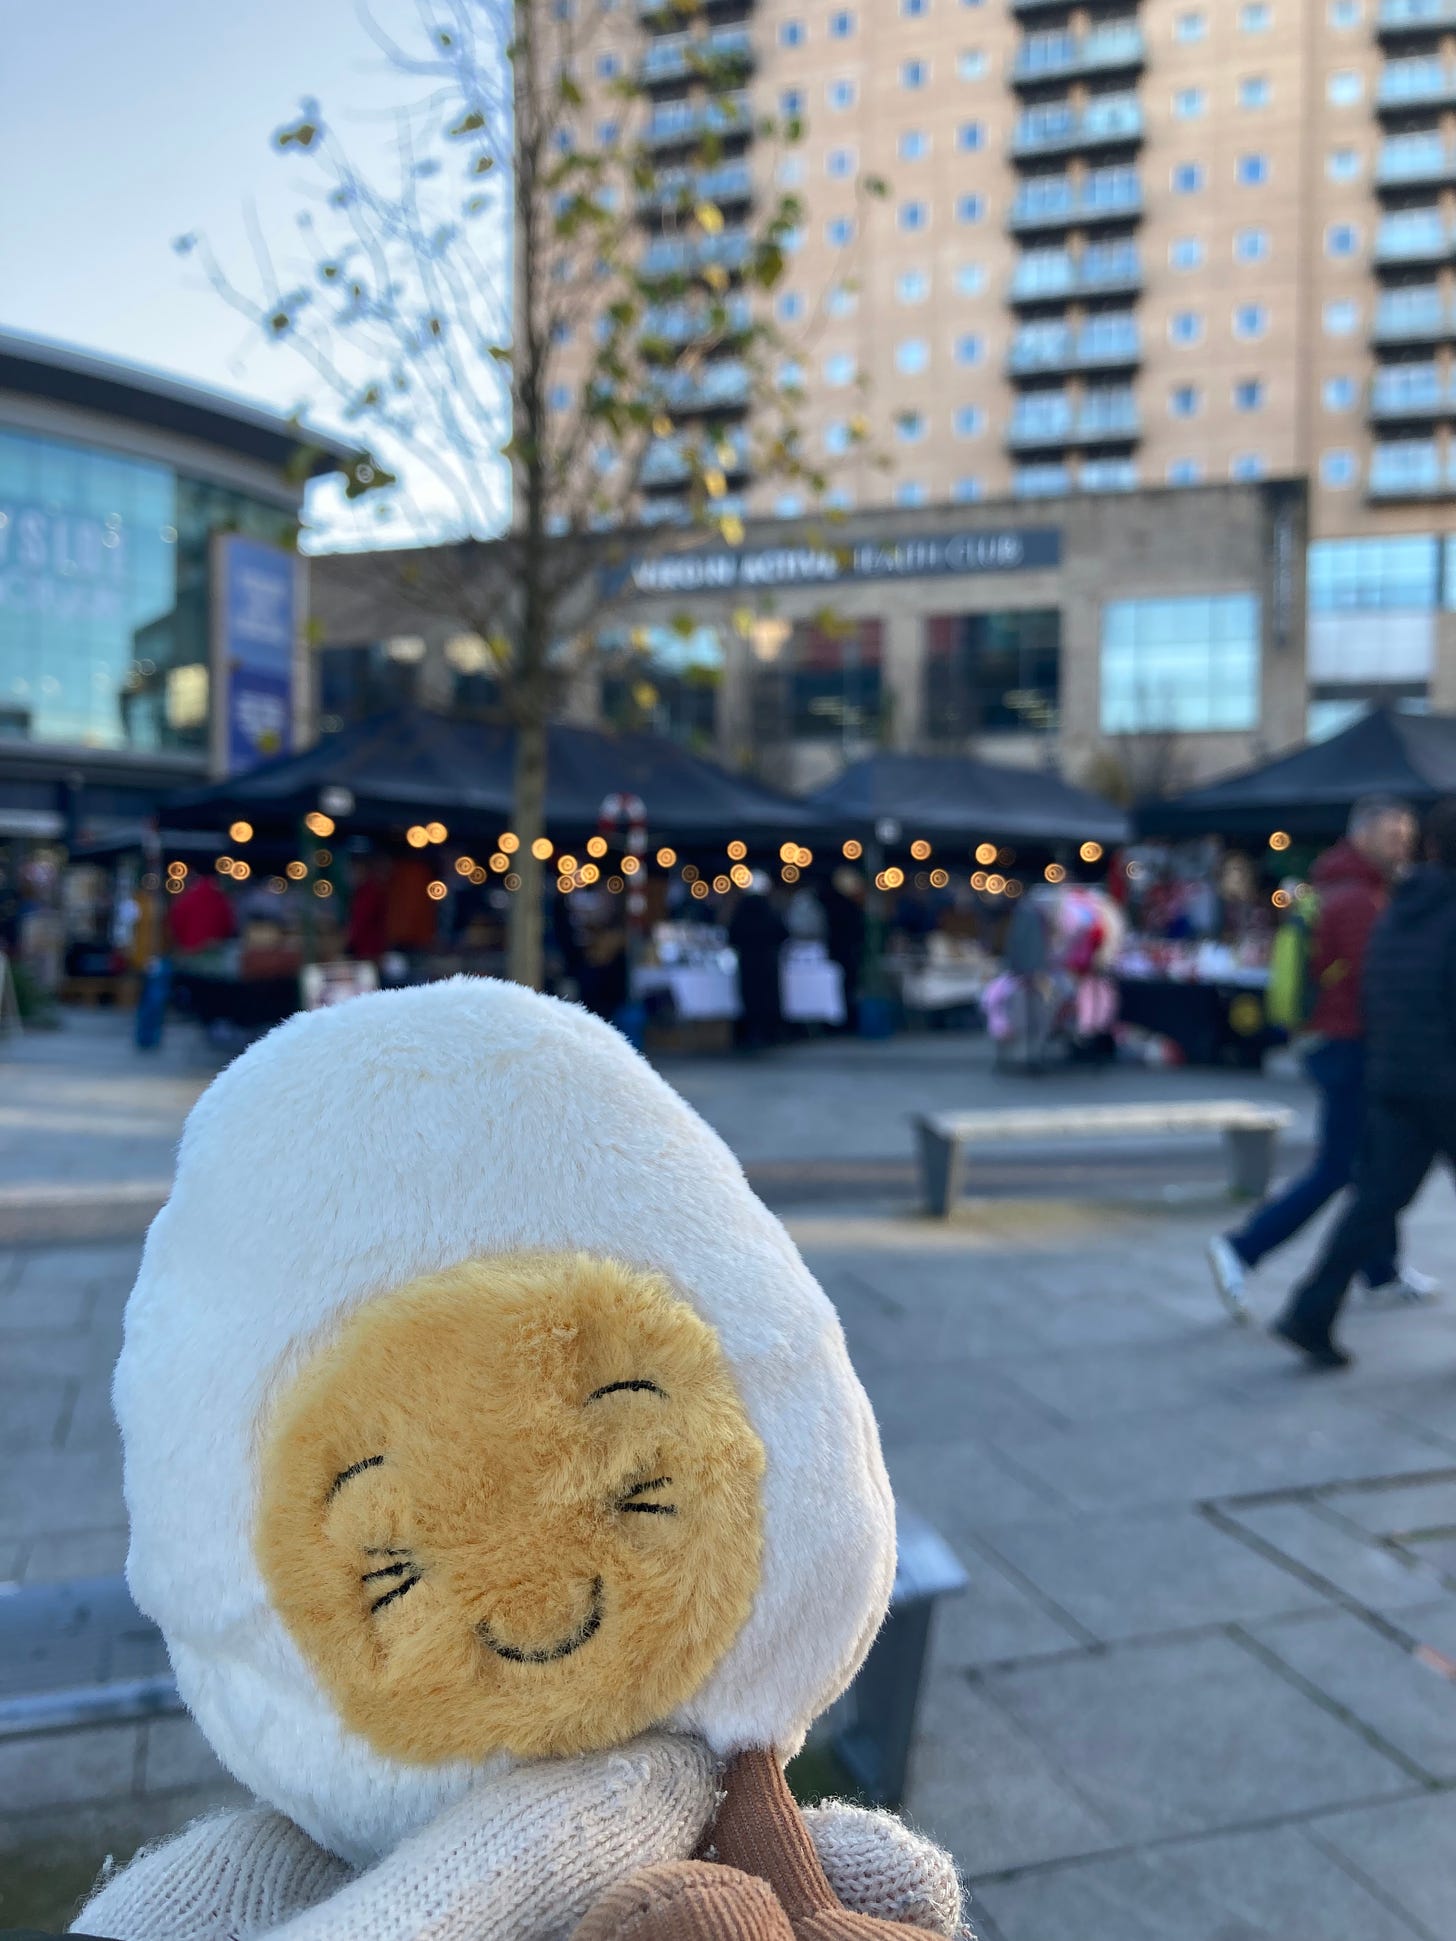 Photograph of a happy egg soft toy held up against a backdrop of christmas market stalls with twinkly lights and festive goodies. 